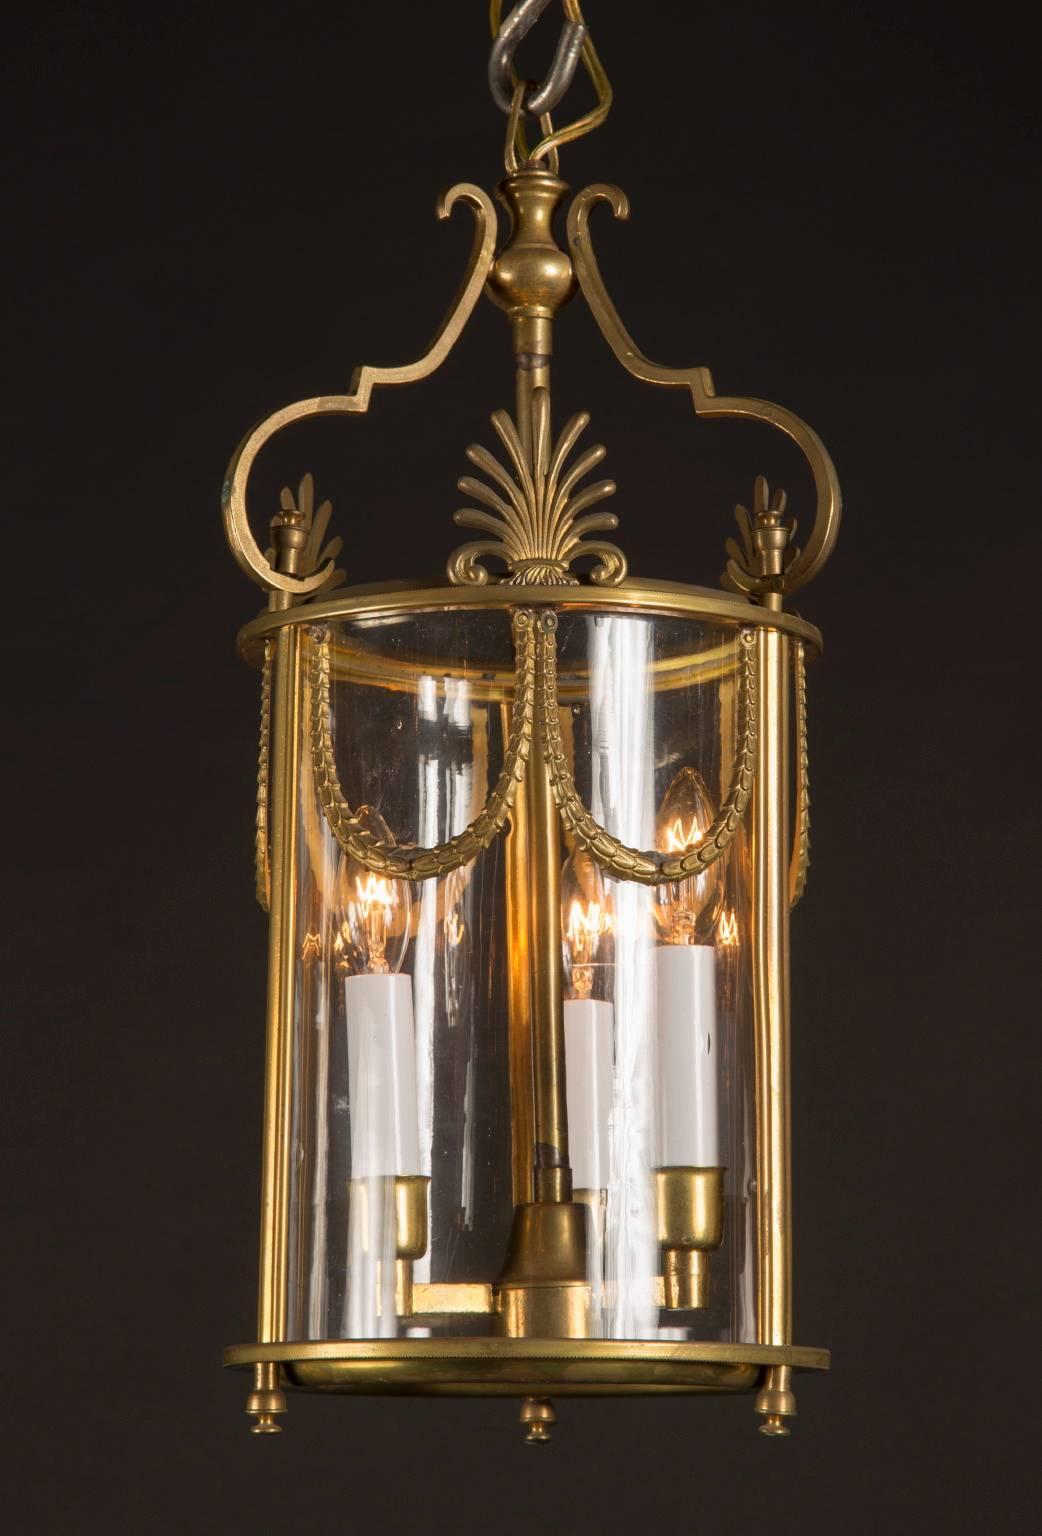 These small cylindrical lanterns are decorated with streams of garlands hanging down from the upper metal rim of the lantern. A trio of palmetto fronds sits atop the metal rim, spaced between three arms that hold the stem of the lantern. The glass